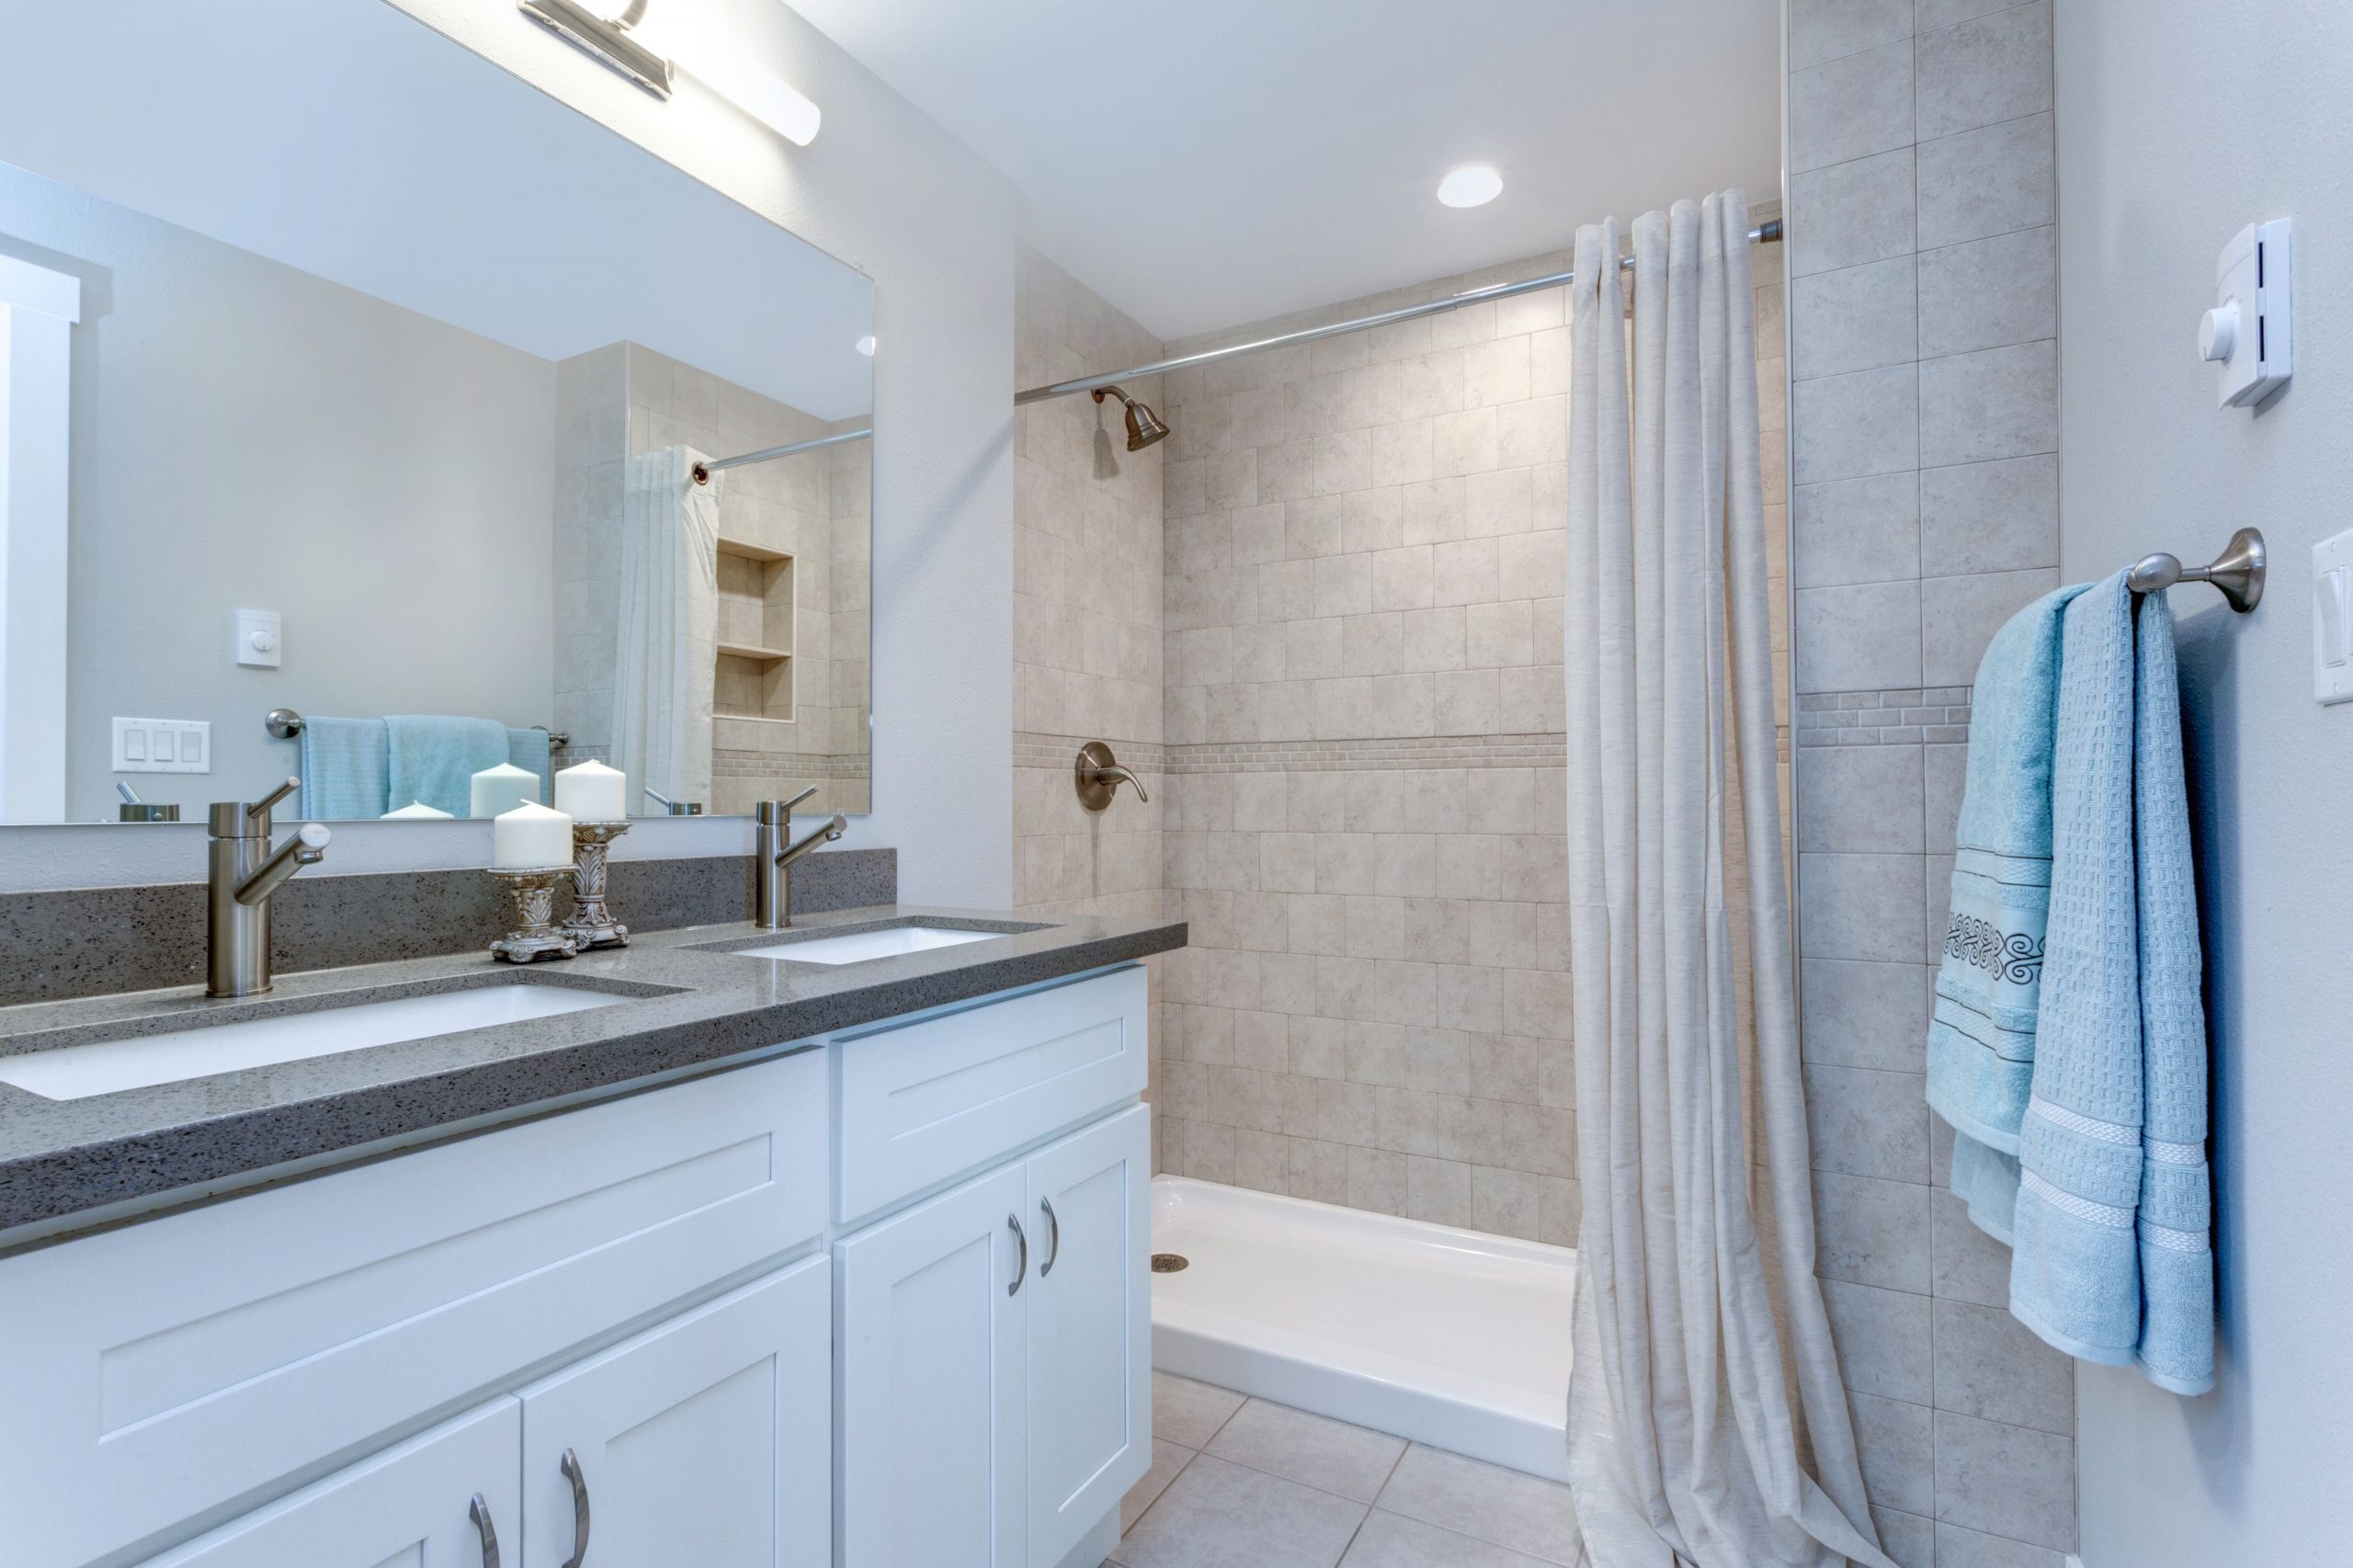 When it comes to bathroom cabinets, one size does not fit all. That's why customizing your cabinets to fit your specific storage needs and preferences can make a world of difference. By customizing your bathroom cabinets, you can create a space that is not only functional but also tailored to your unique style.